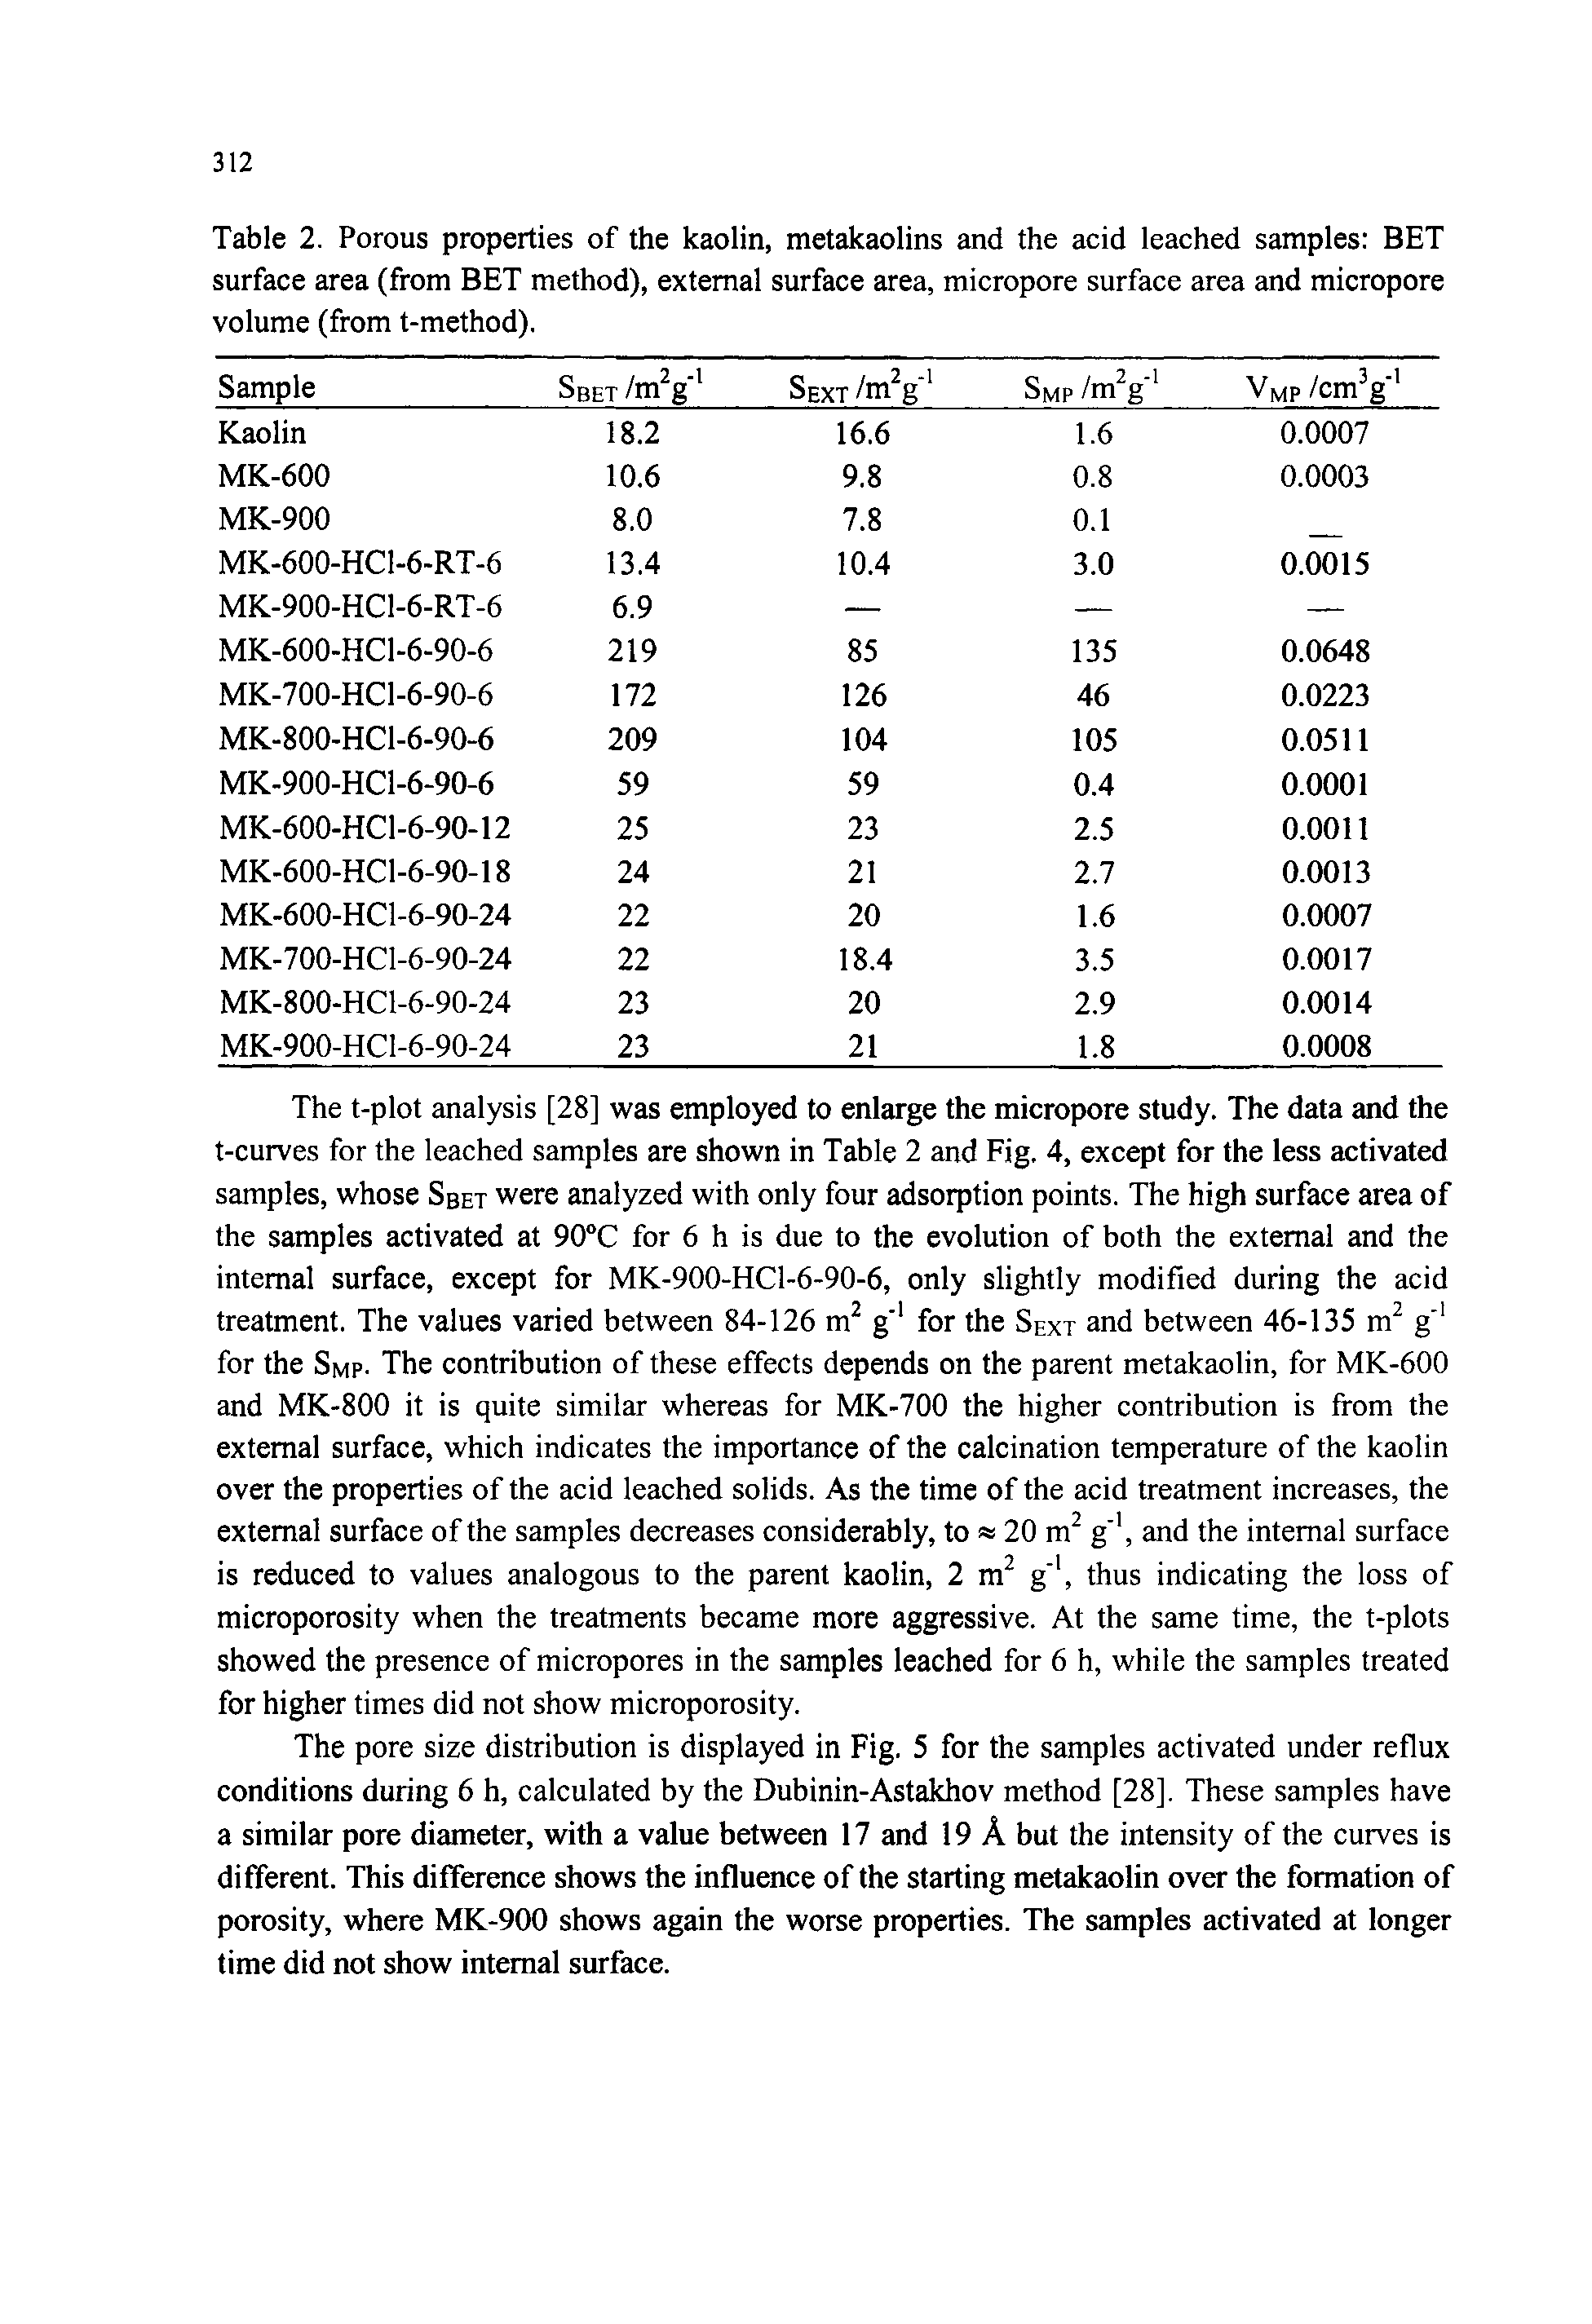 Table 2. Porous properties of the kaolin, metakaolins and the acid leached samples BET surface area (from BET method), external surface area, micropore surface area and micropore volume (from t-method).